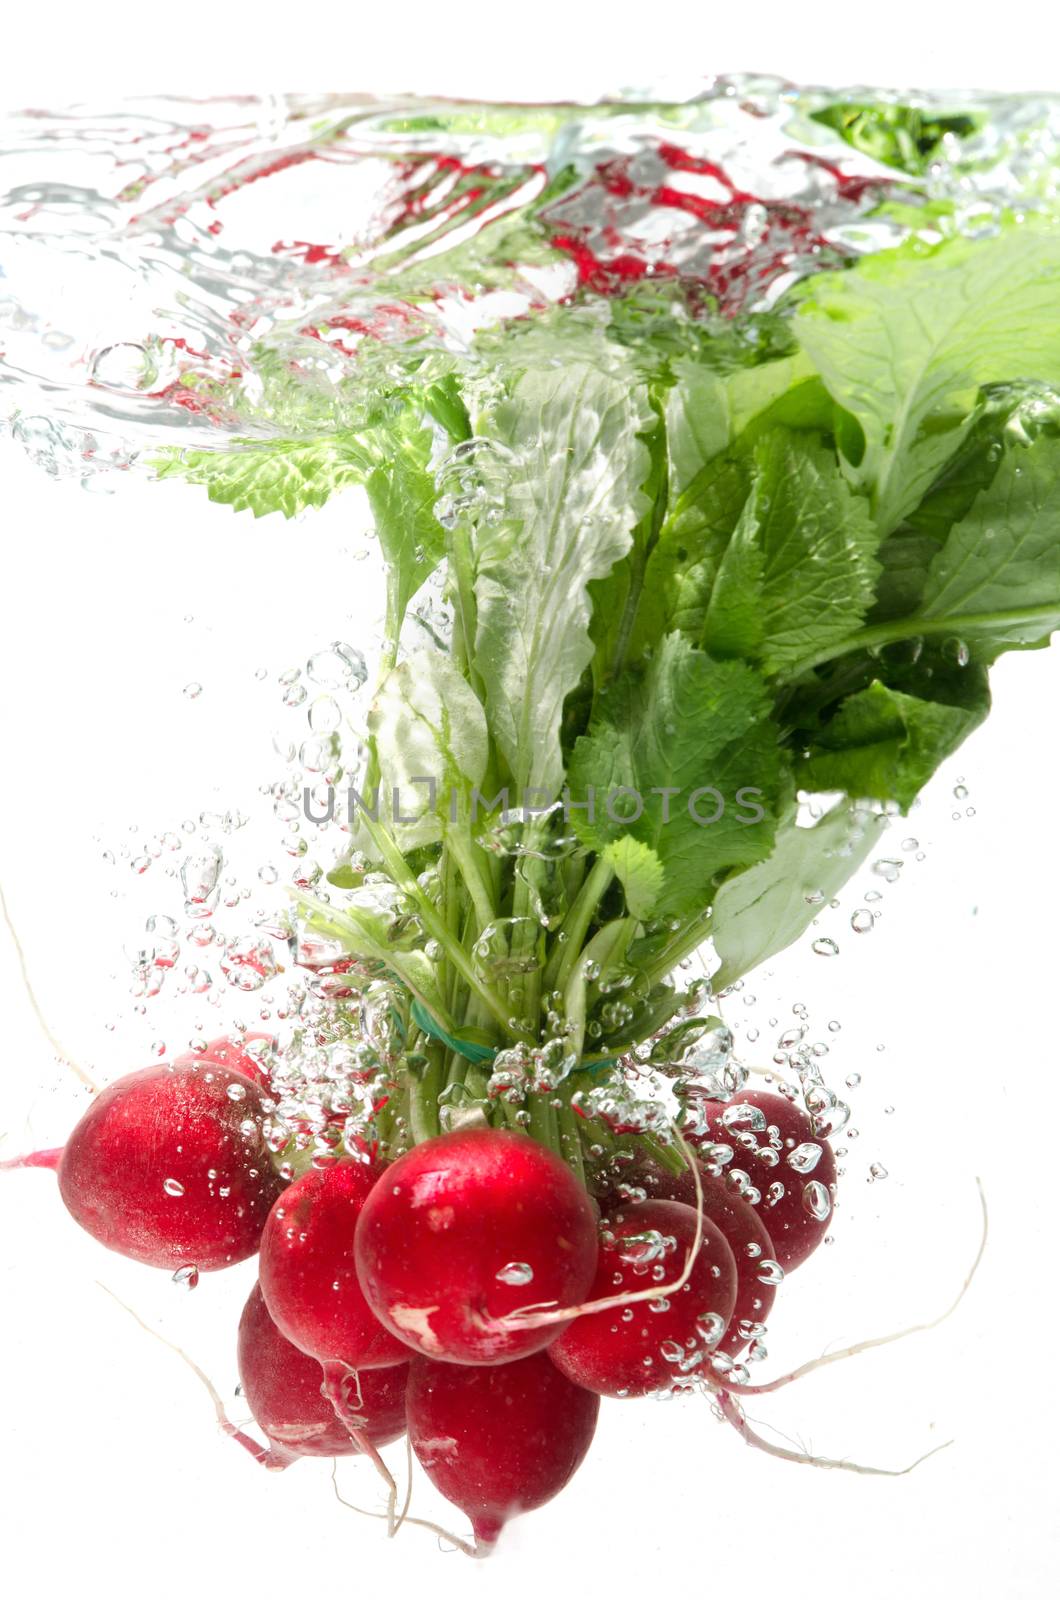 Bunch of radishes falling into water, white background isolated.